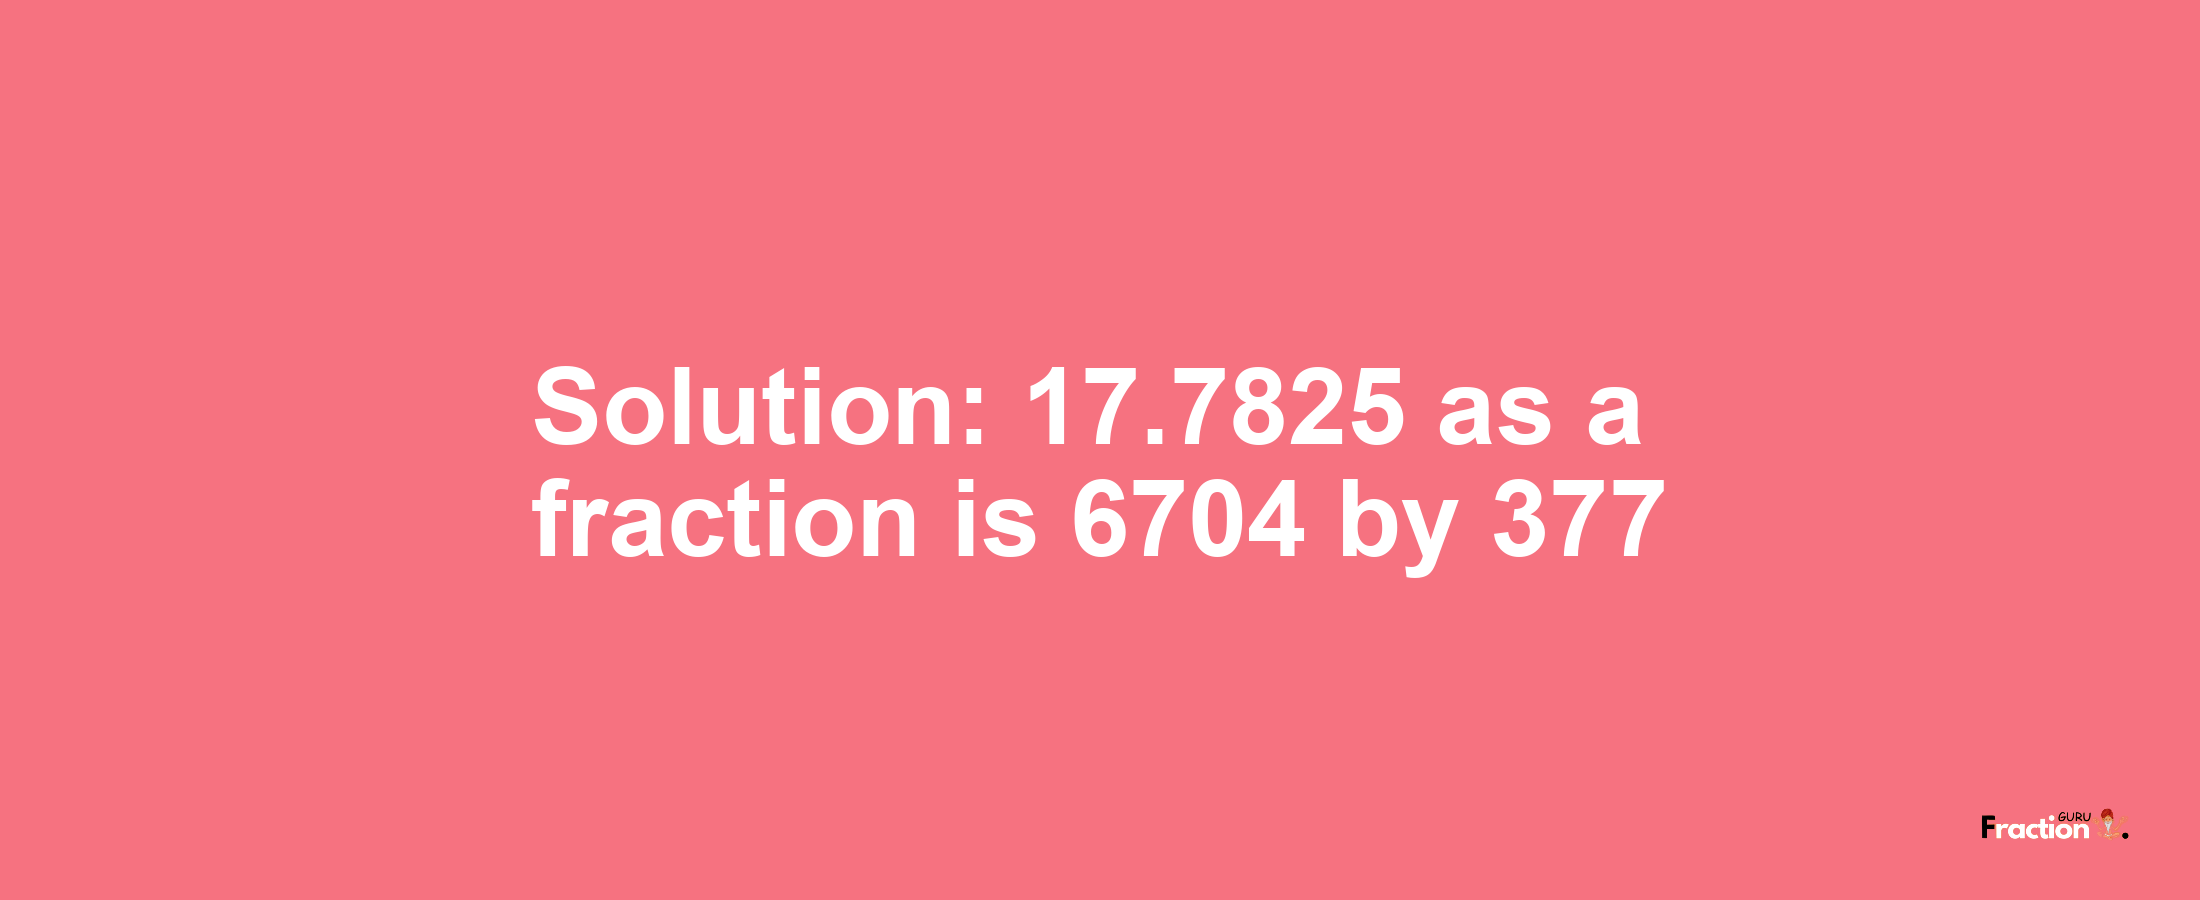 Solution:17.7825 as a fraction is 6704/377